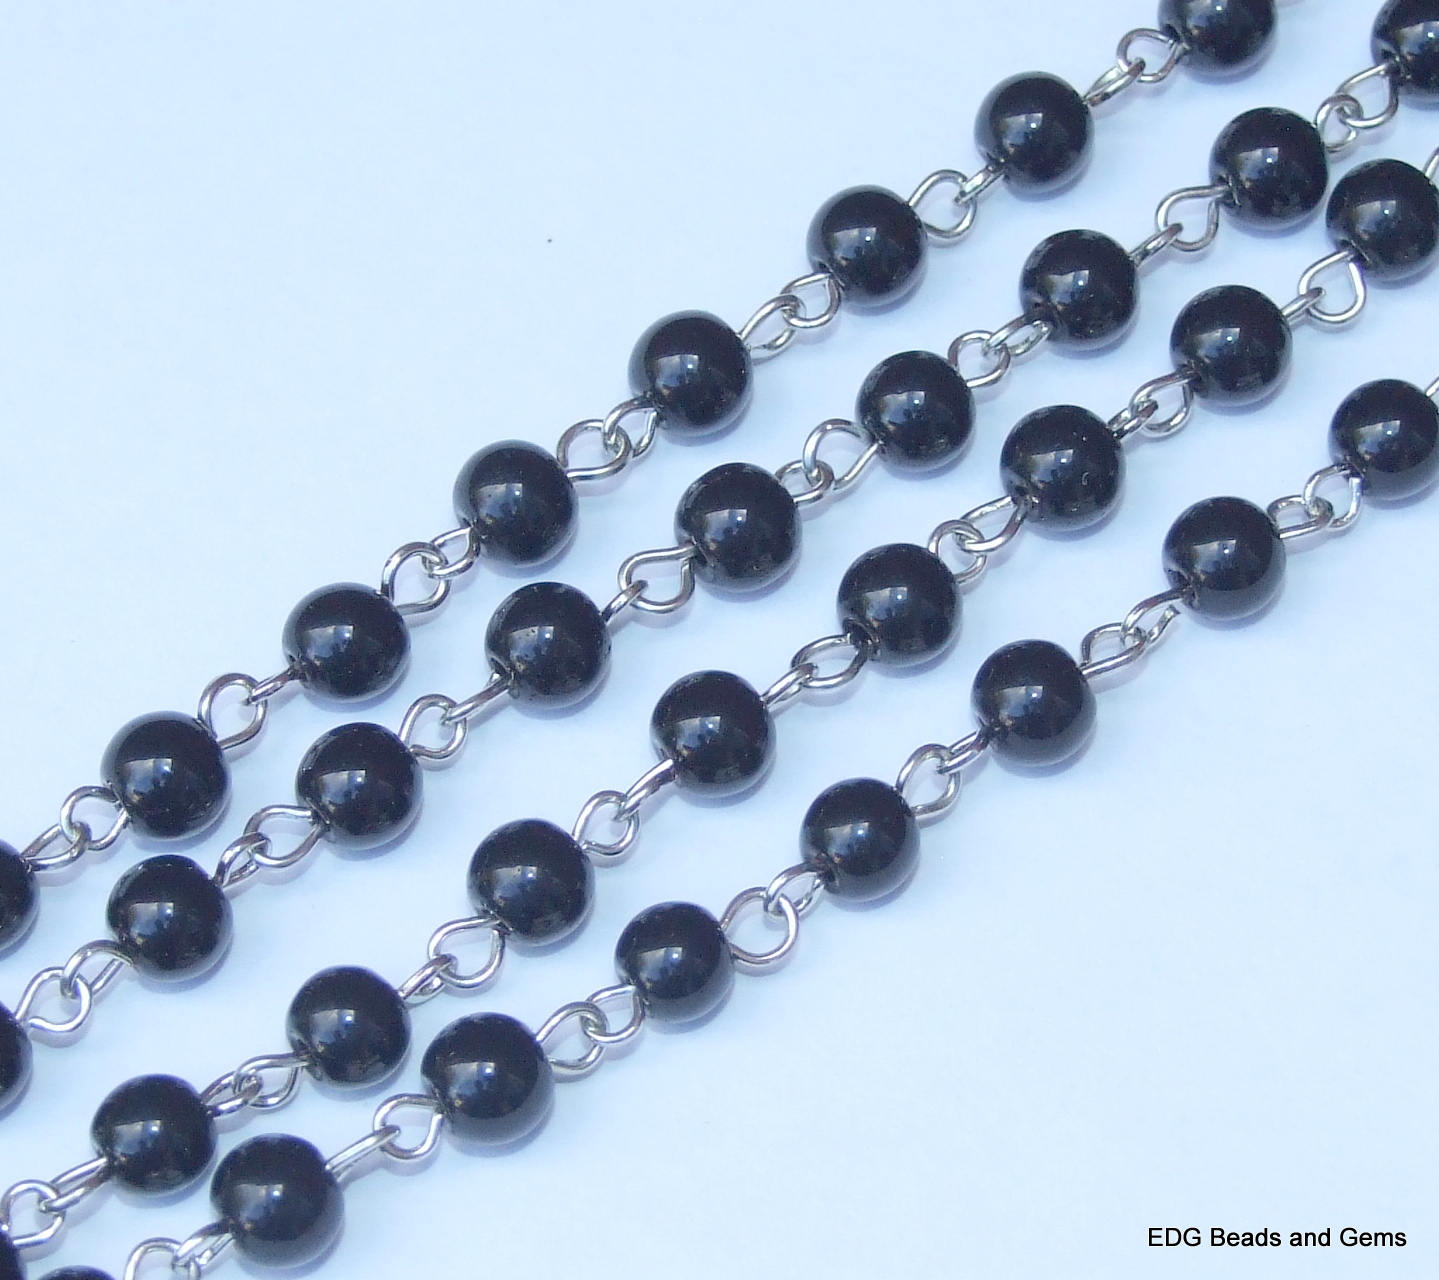 8mm Black Polished Pearl Rosary Chain, 1 Meter, Glass Beads, Beaded Chain, Body Chain Jewelry, Silver Chain, Necklace Chain, Belly Chain